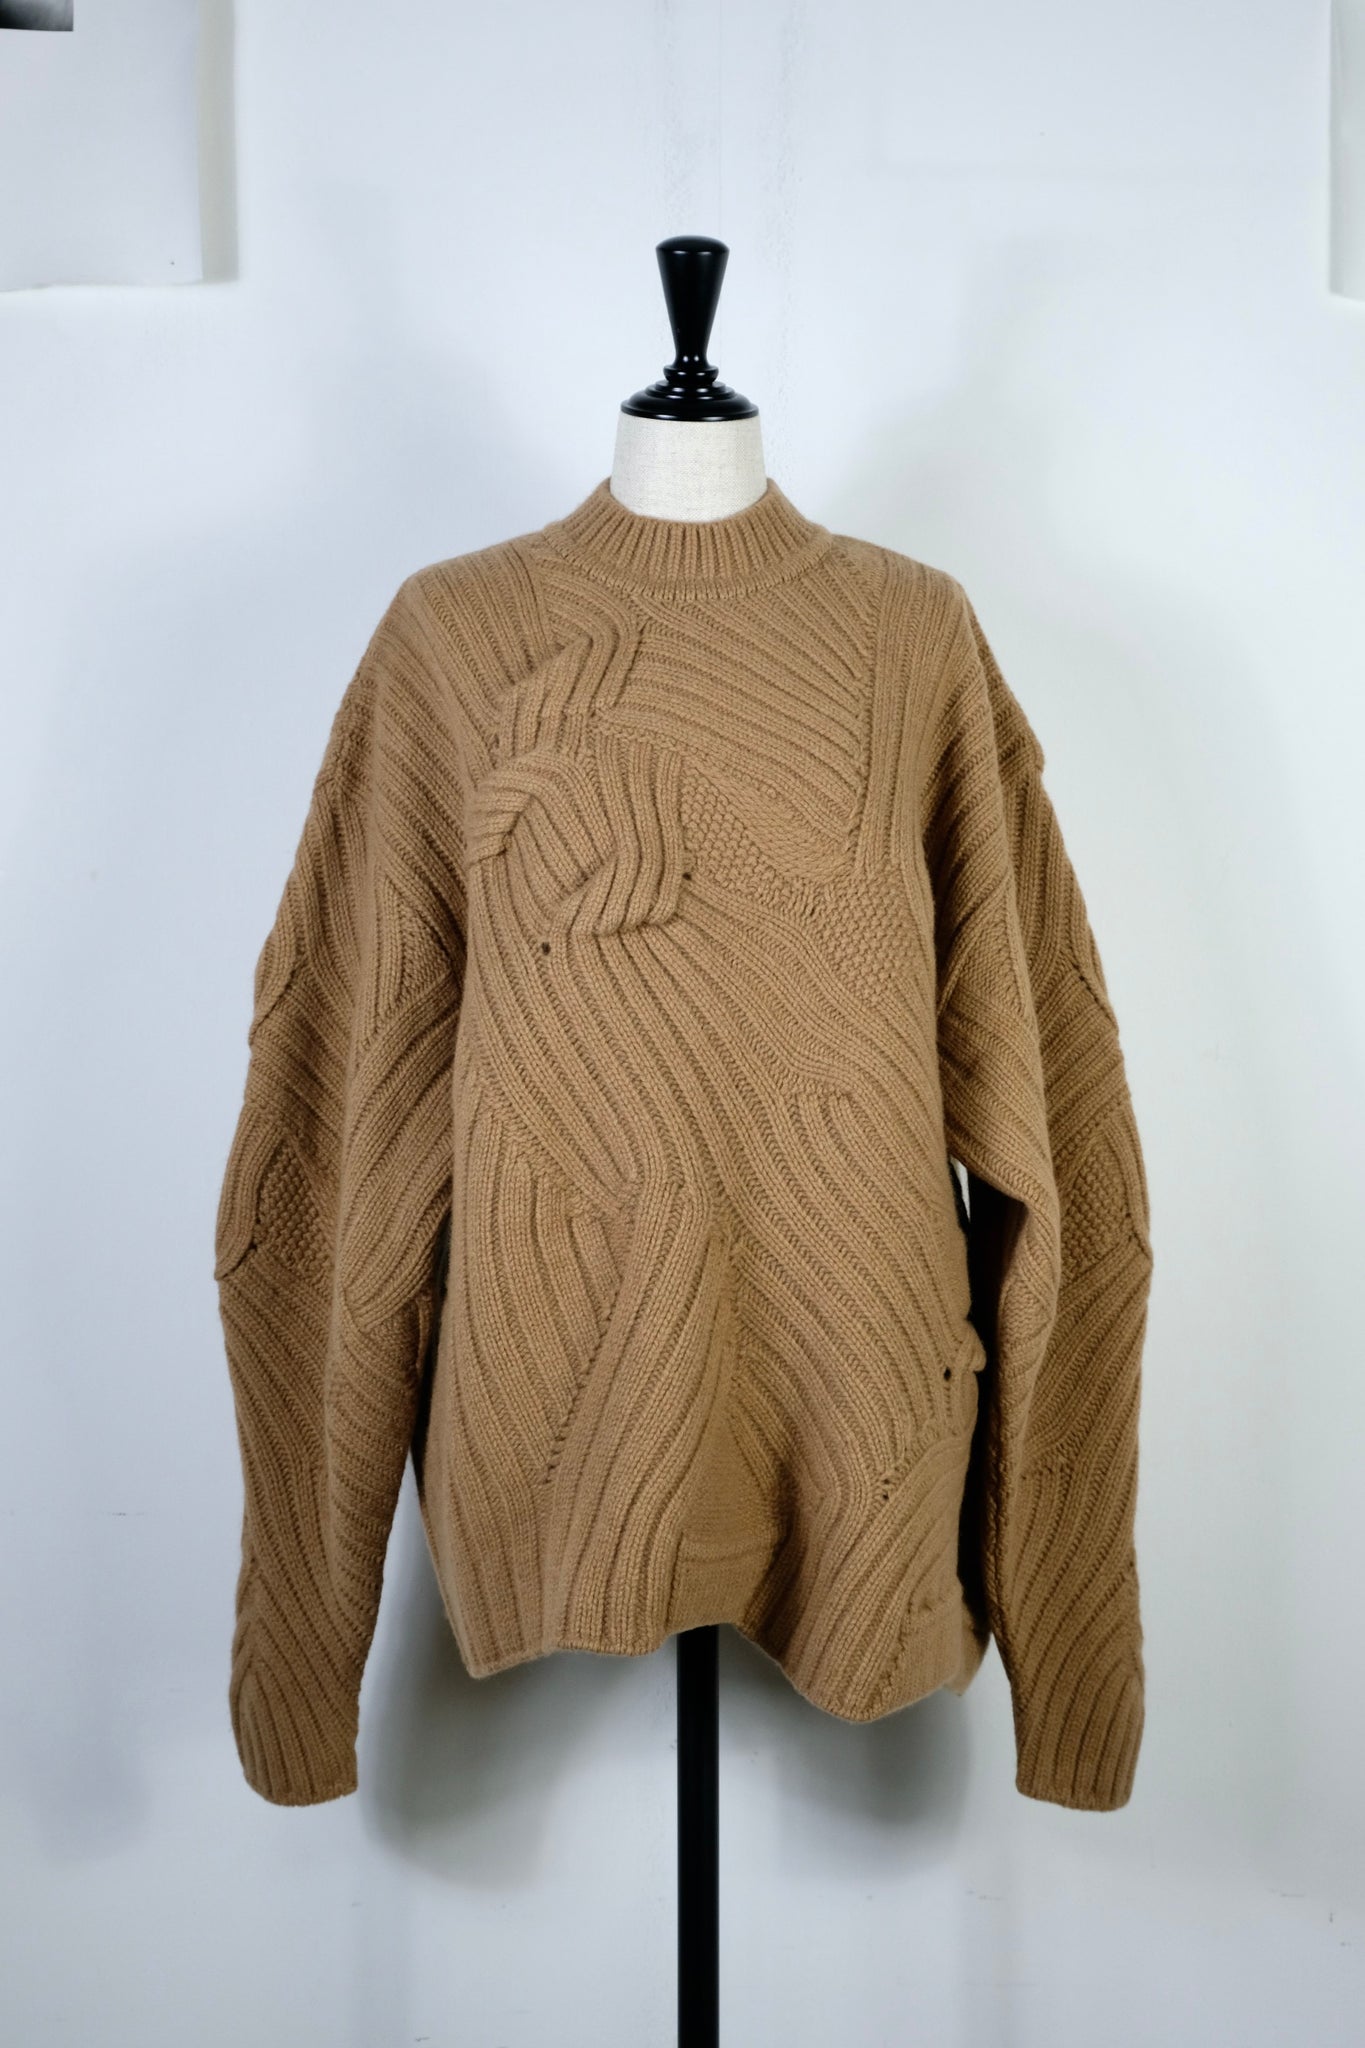 Mame Kurogouchi "BASKET MOTIF CABLE STITCH KNITTED PULLOVER"